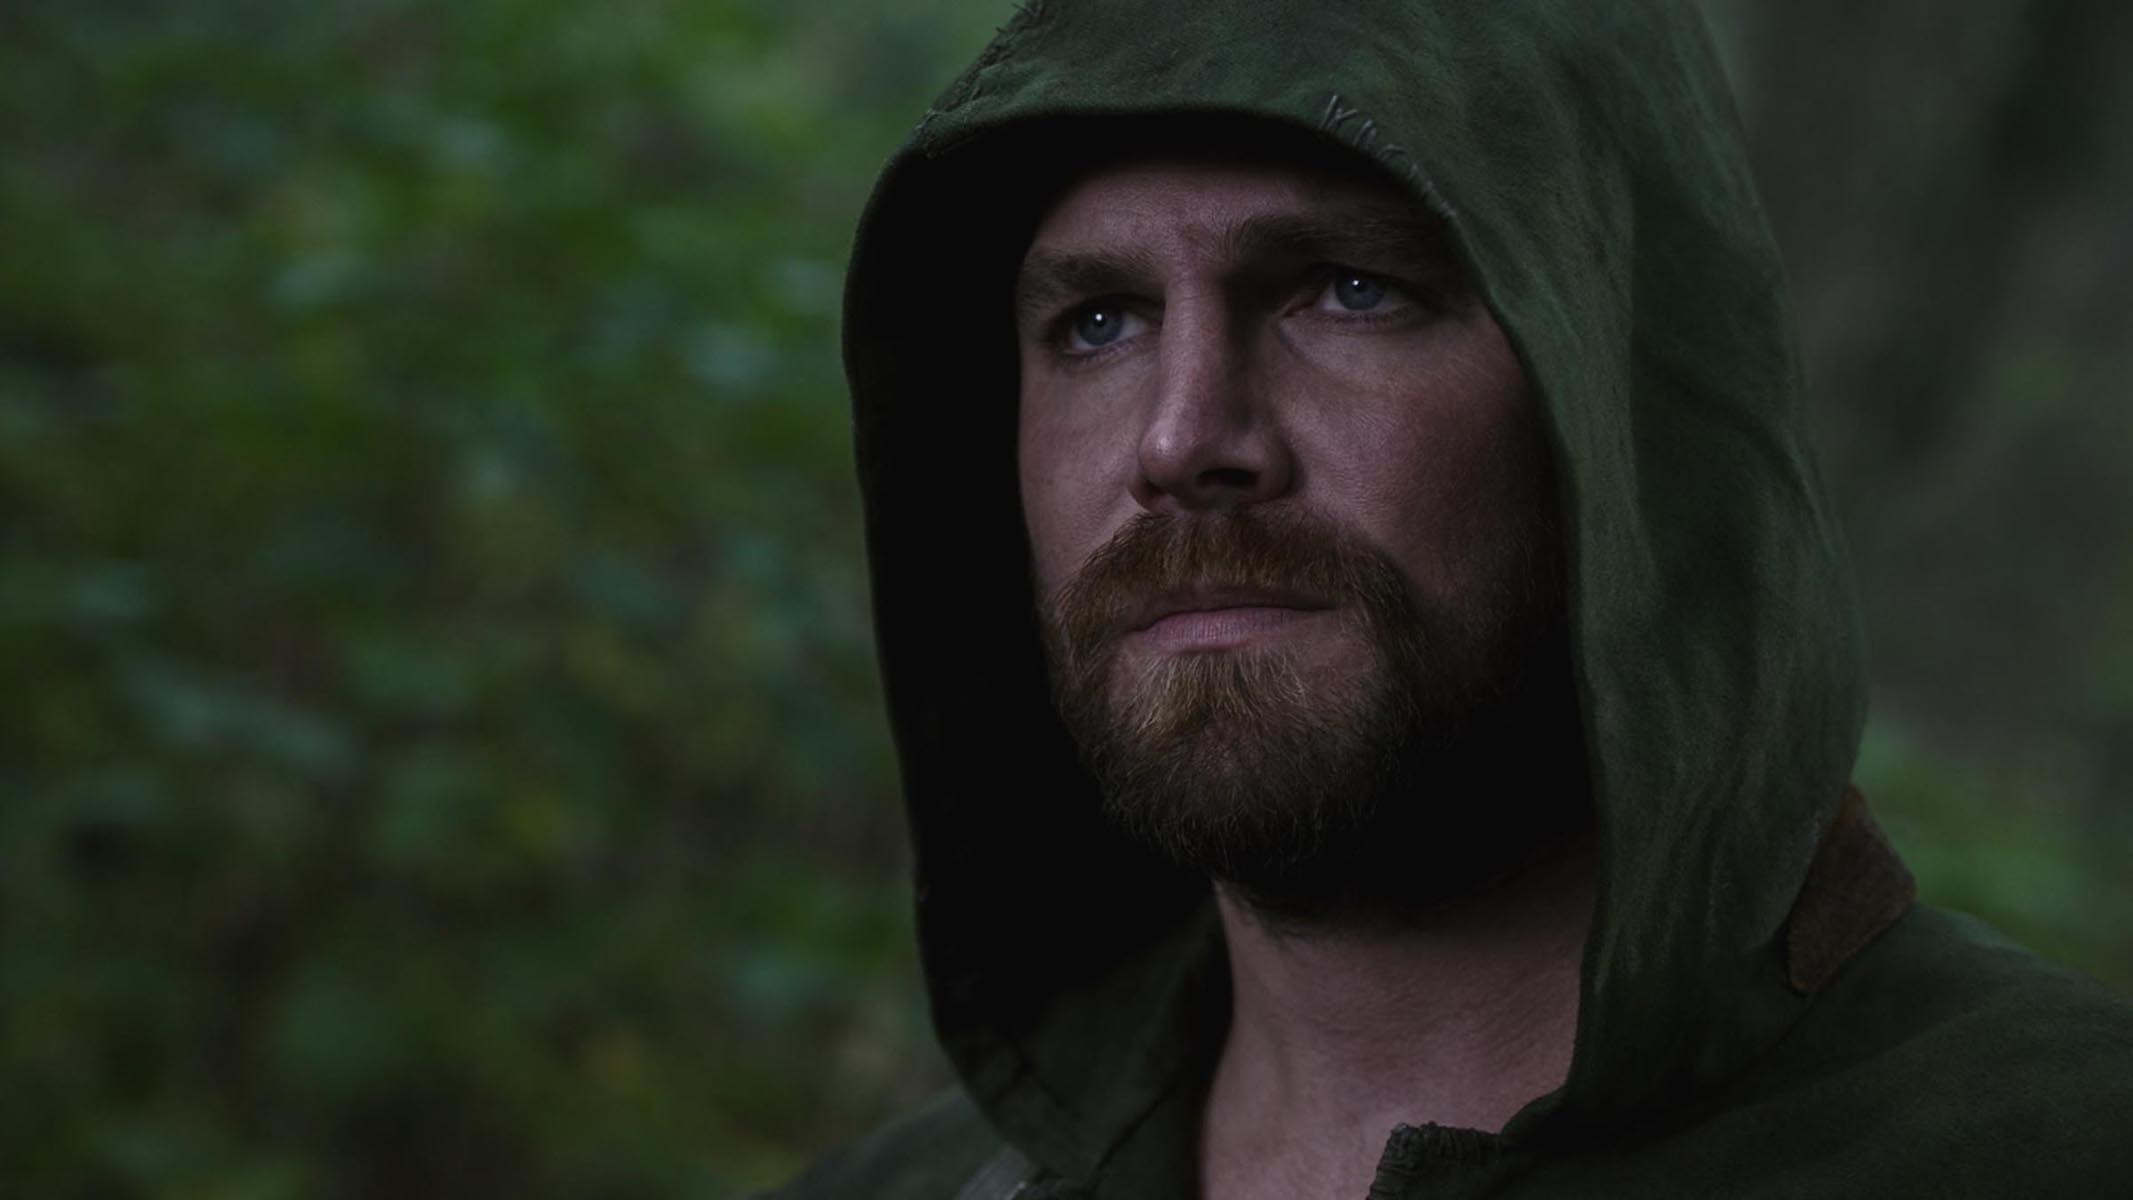 Stephen Amell as Oliver Queen/Green Arrow